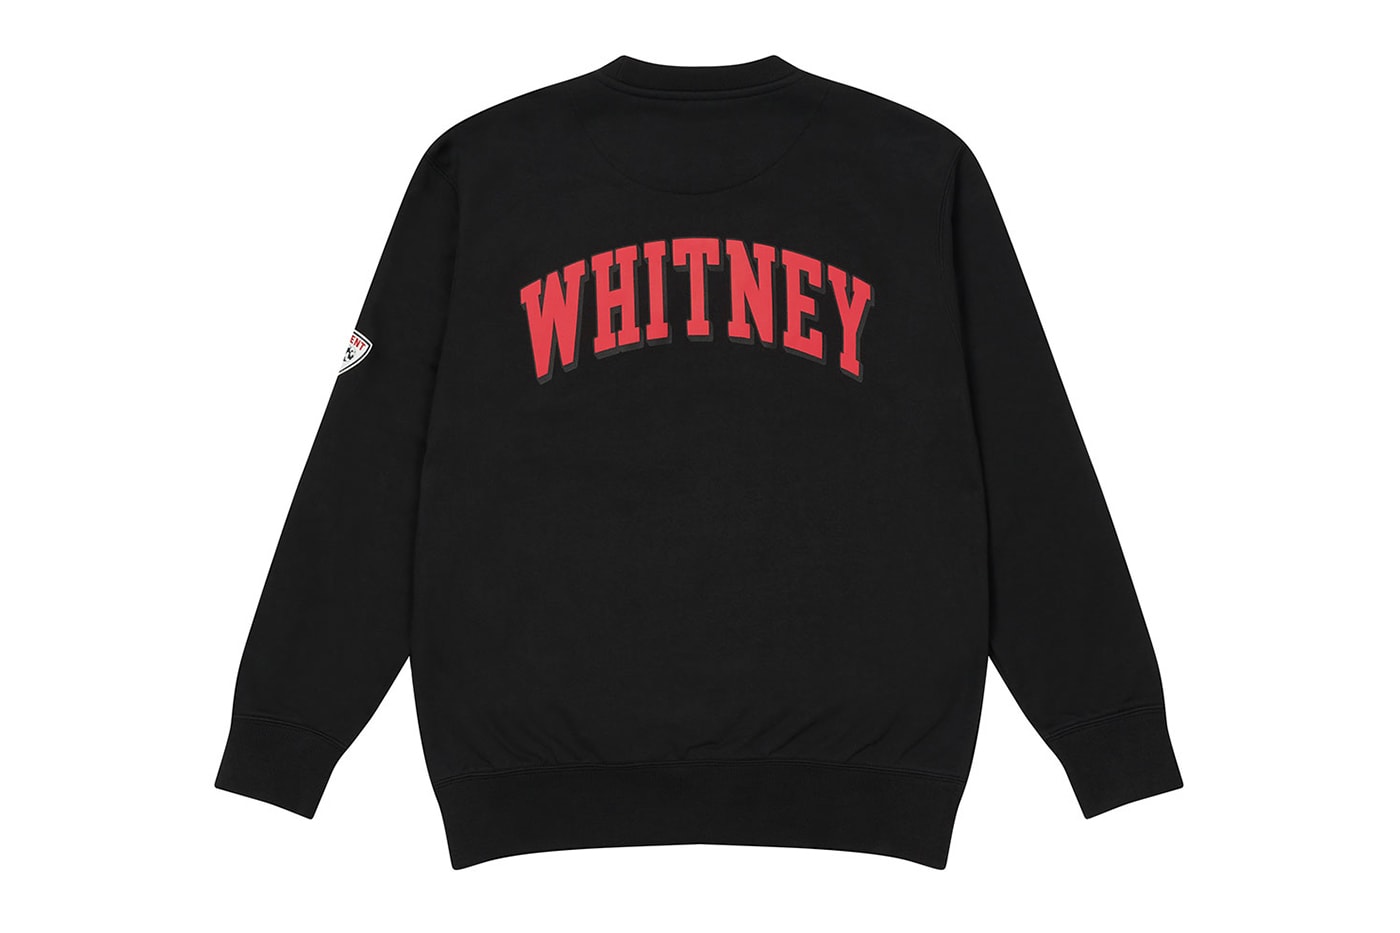 Palace Whitney Houston Capsule for Charity Release Info Skateboards Jacket T shirt cap hat Rock and Roll Hall of Fame Sweater ebbets